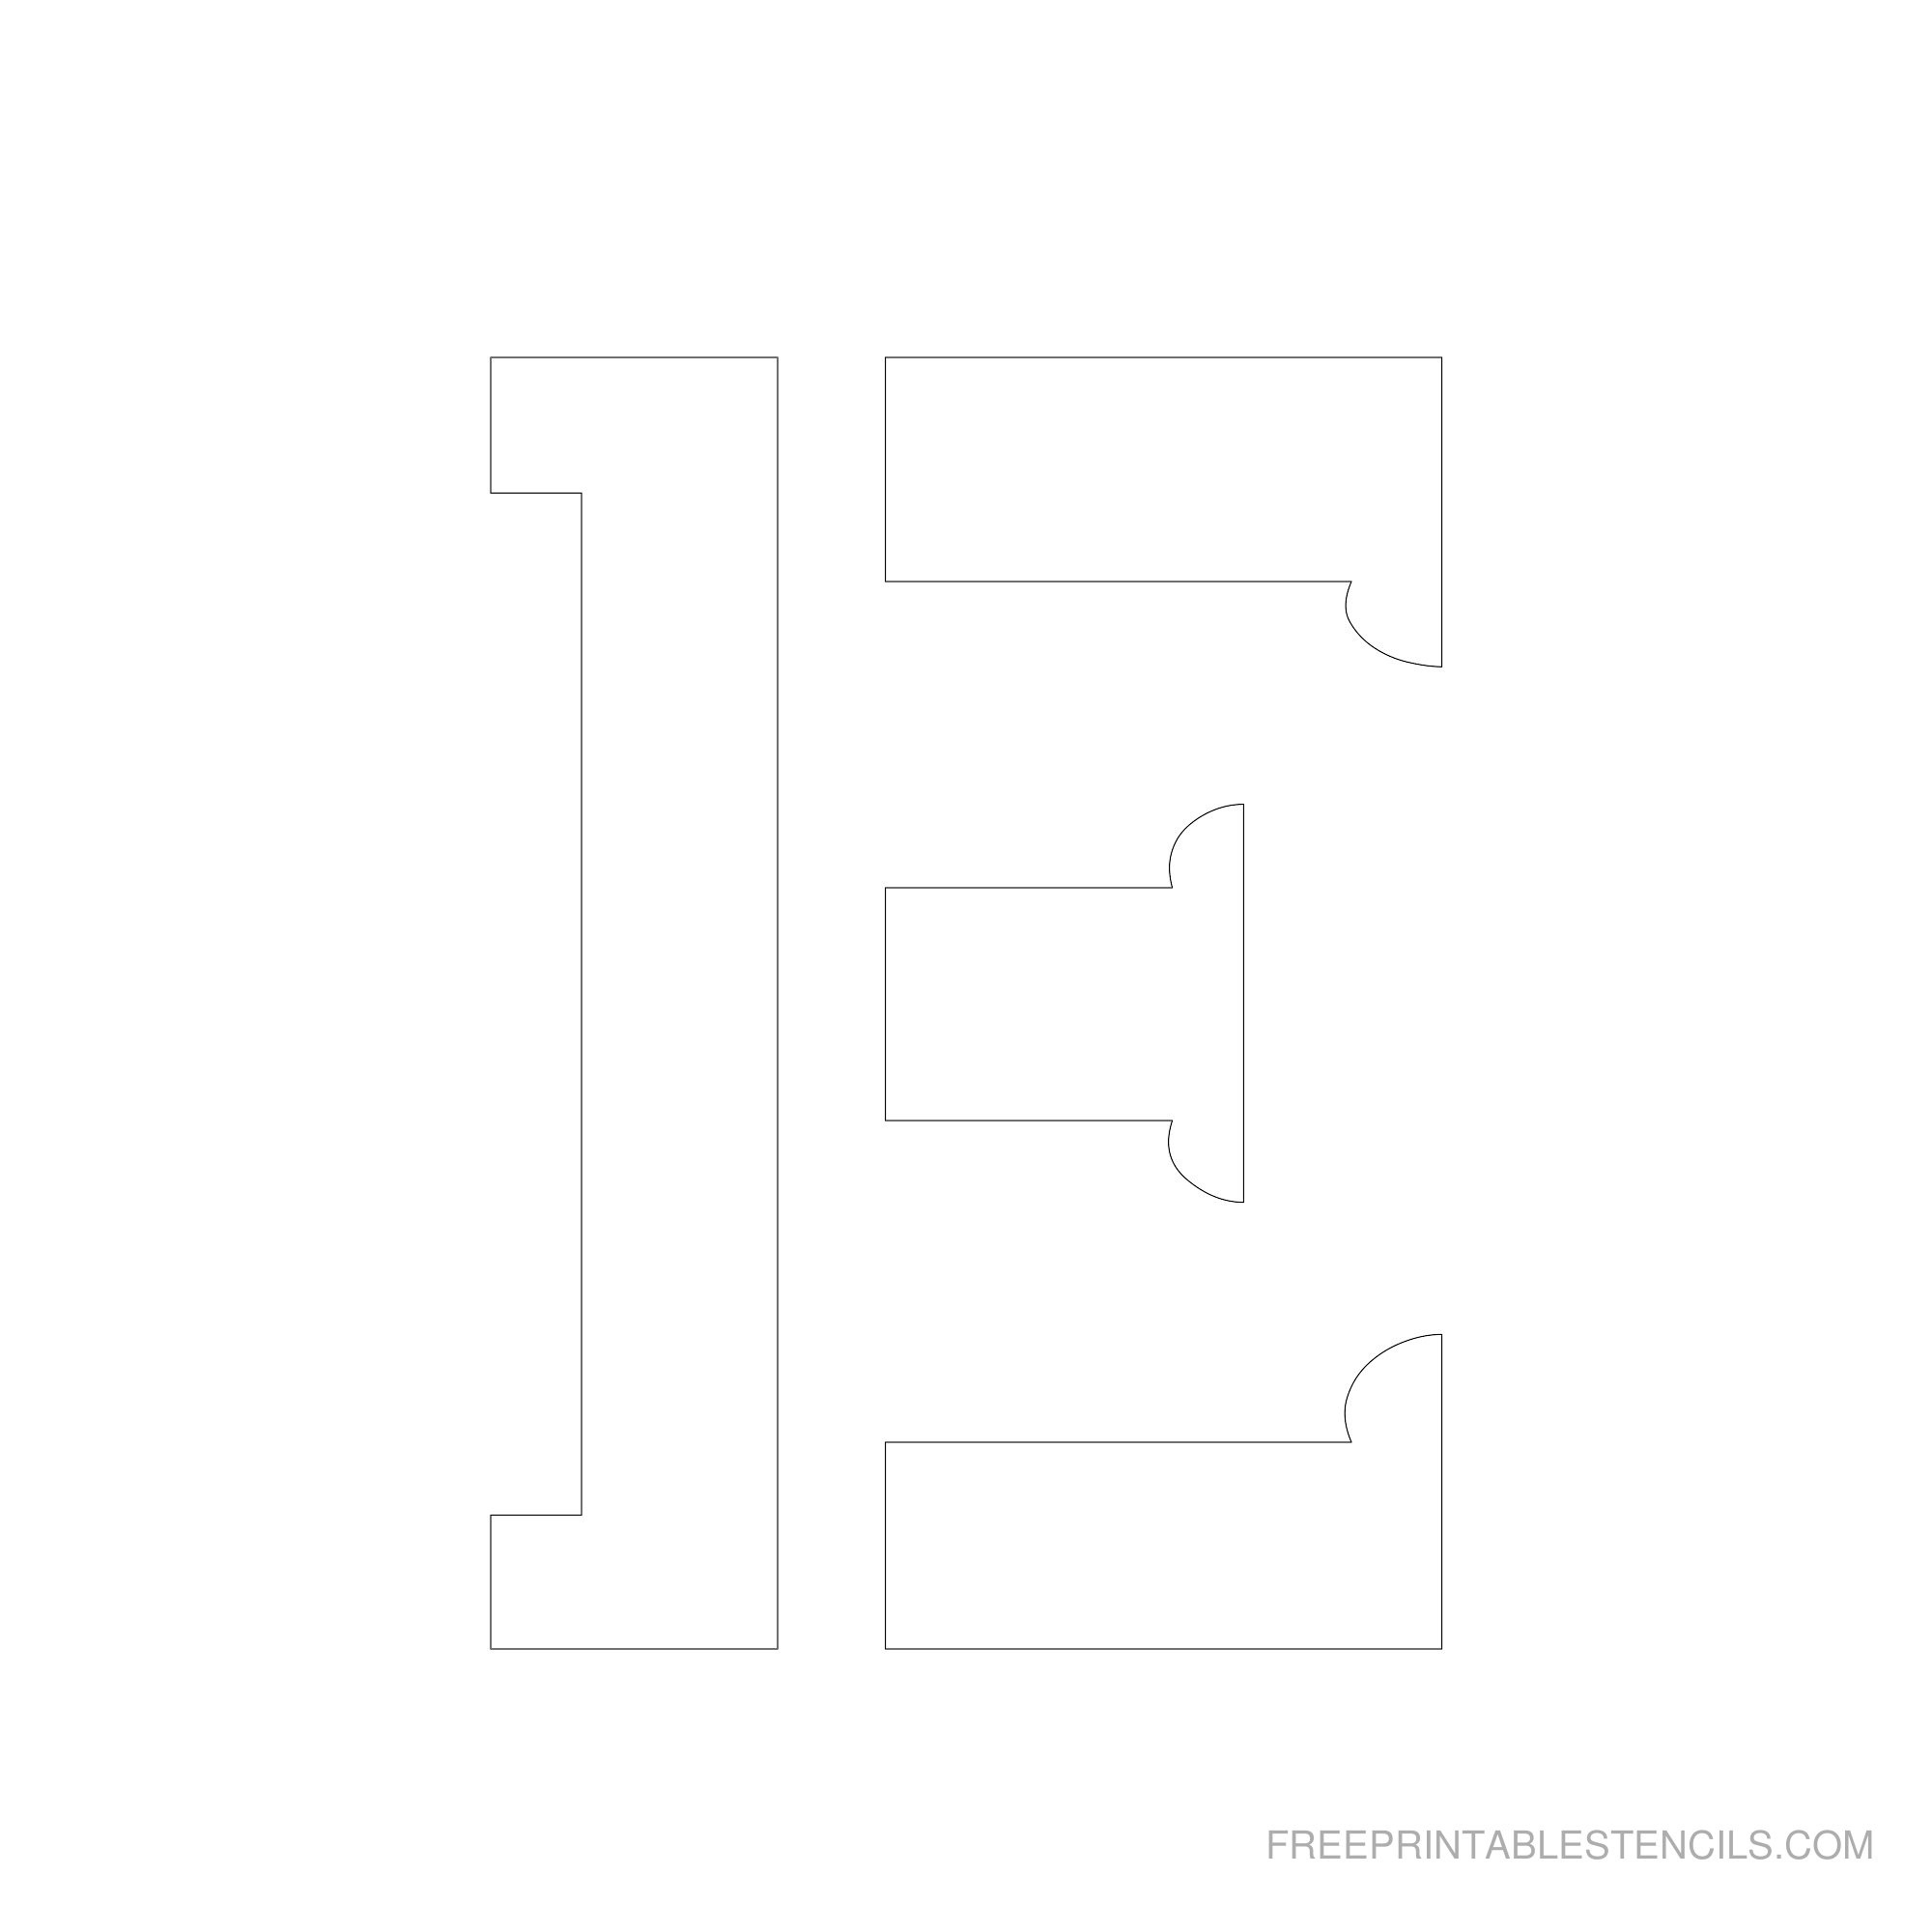 Letter Stencils To Print | Free Printable Stencils - Free Printable 10 Inch Letter Stencils